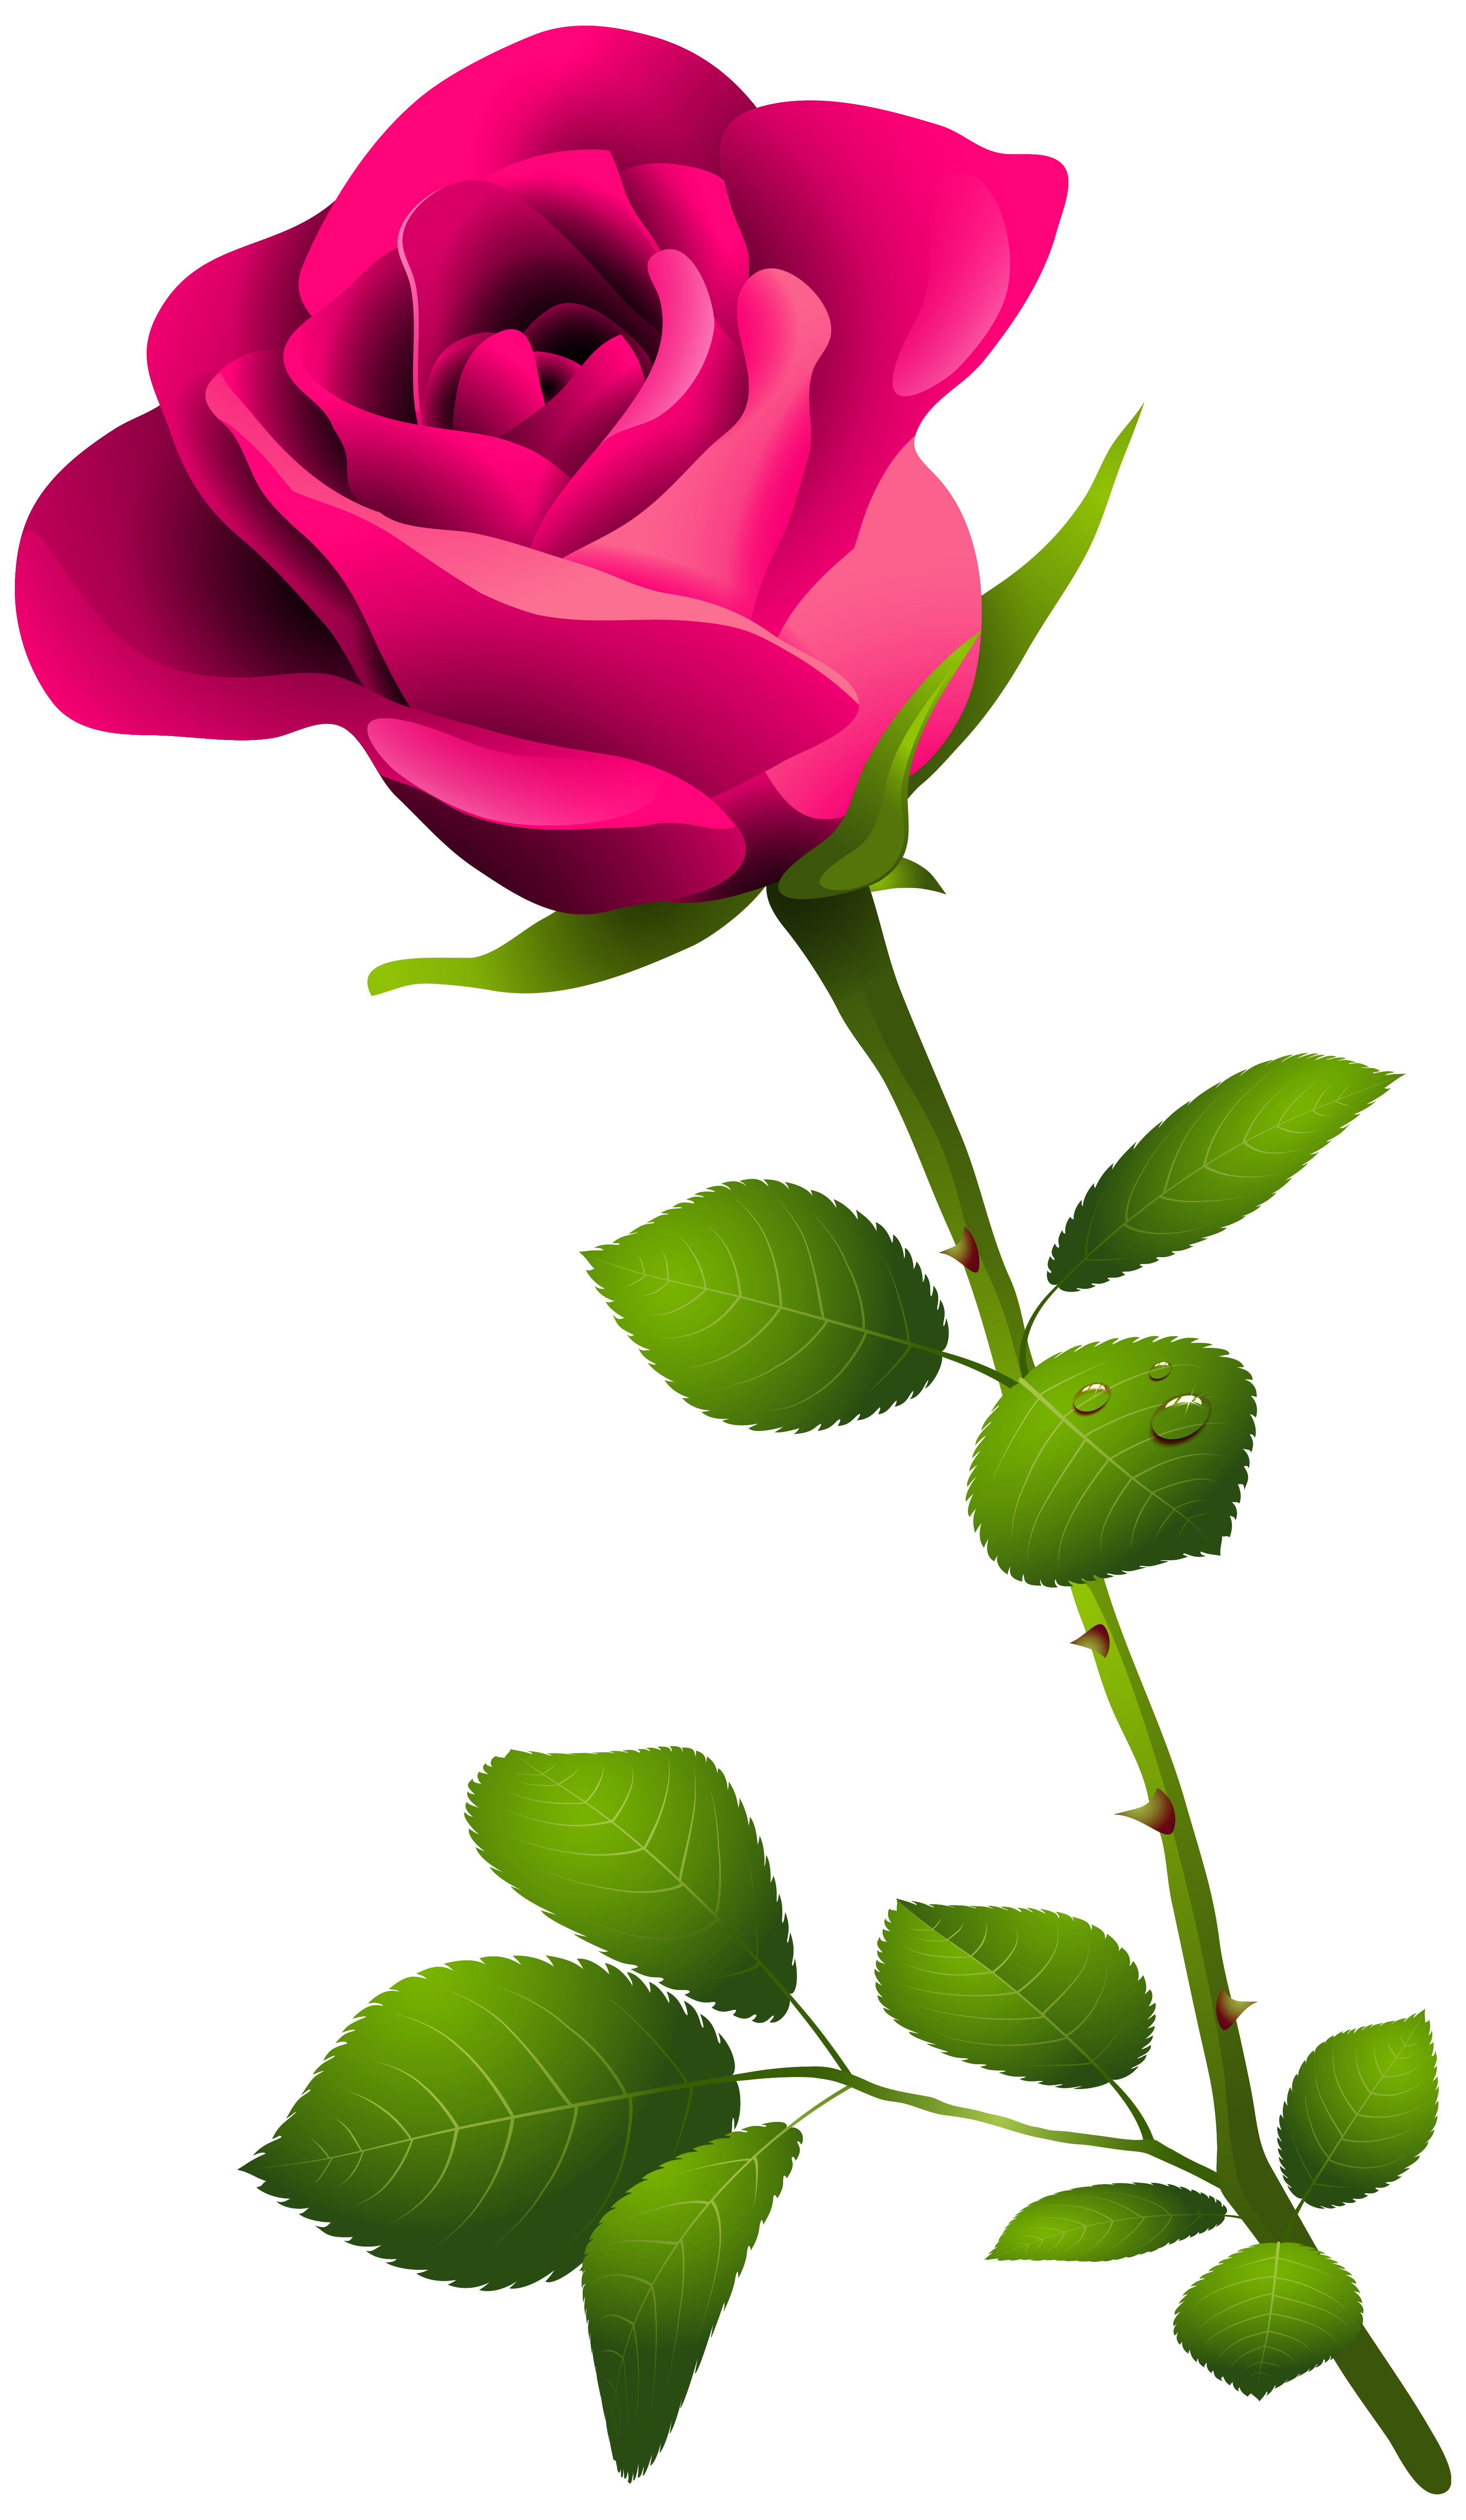 Pink Rose with Stem PNG Clipart Image | Gallery Yopriceville - High ...